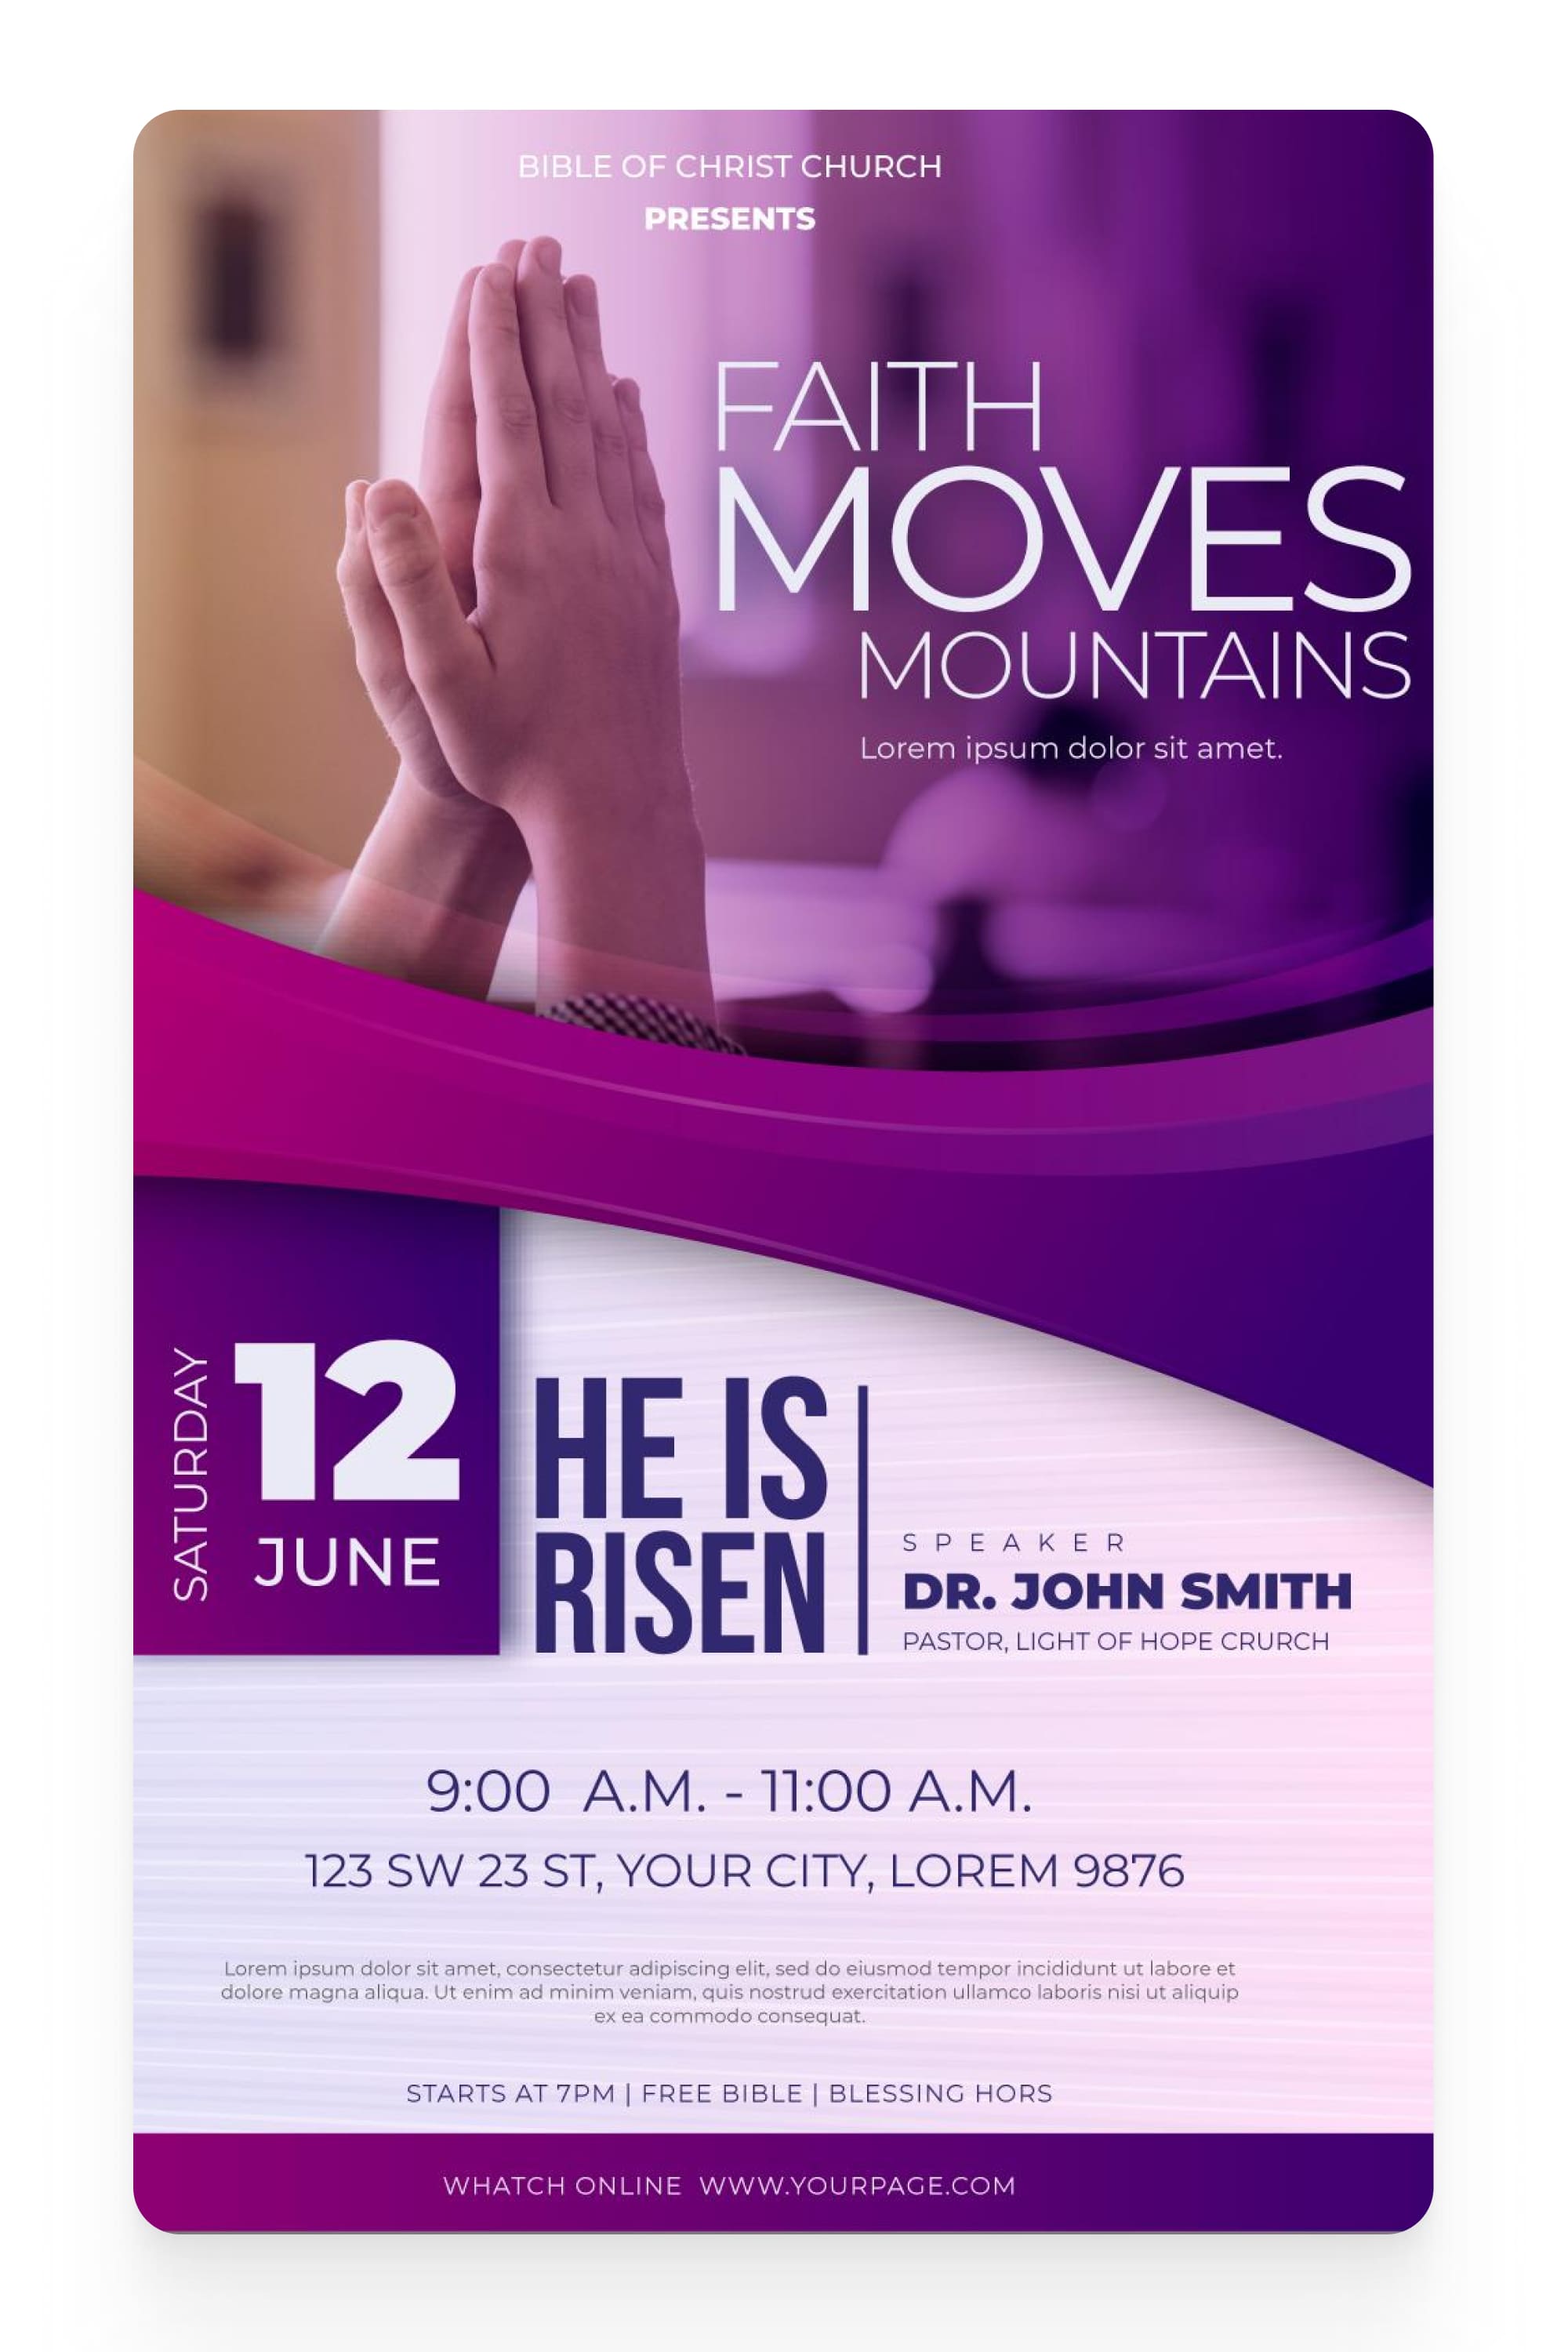 Flyer with a photo of hands folded in prayer.